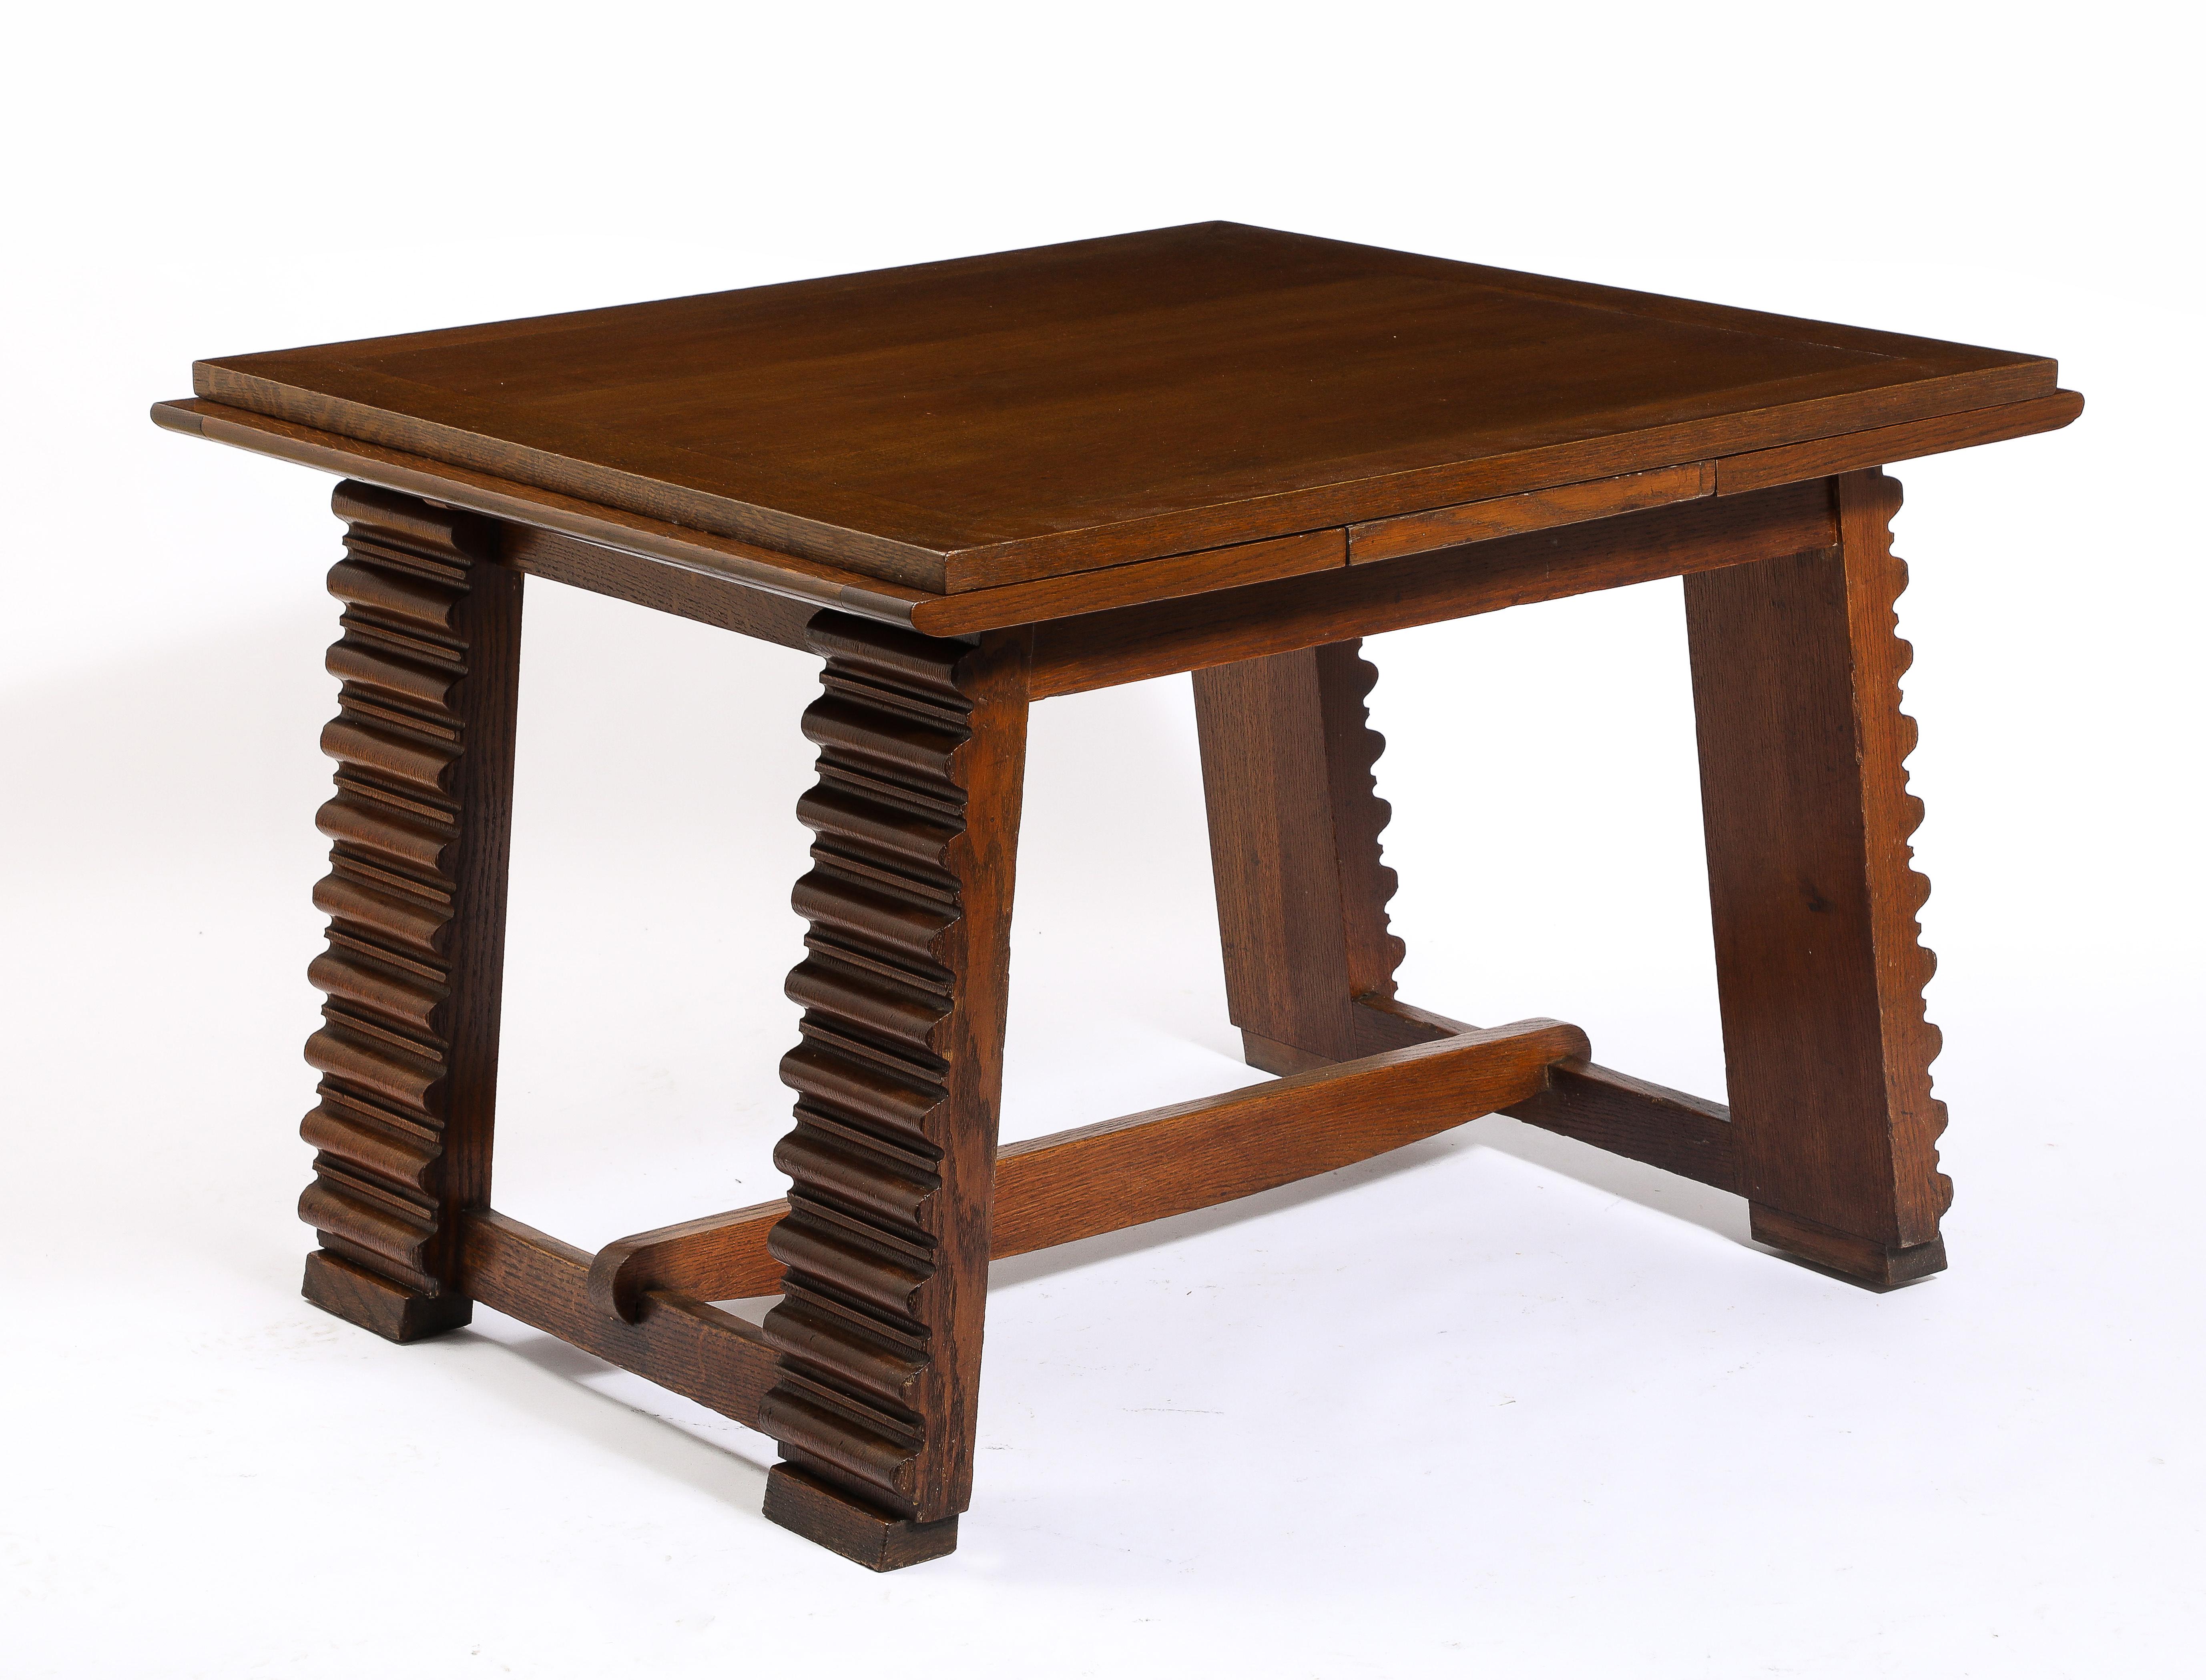 Striking center table in oak with intricately carved legs linked by a semi curved stretcher, the cleverly designed top deploys from 41” to 75” by simply pulling the leaves that subtly protrude on each ends.
